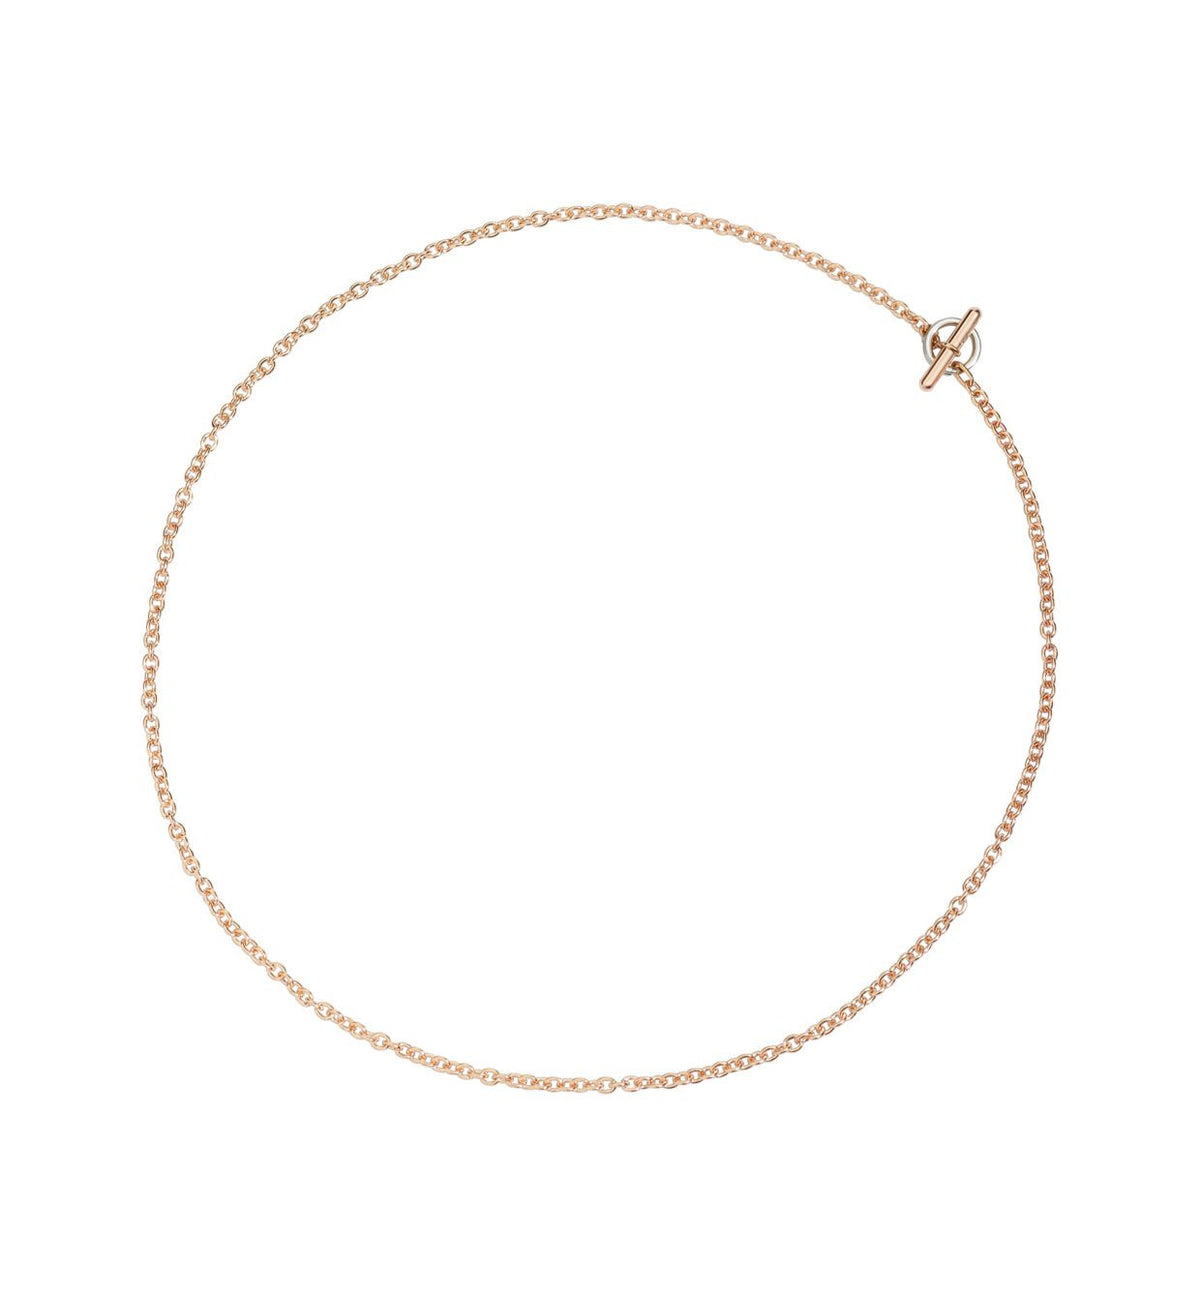 DoDo Chain in 9k Rose Gold with 18k White Gold Toggle Ring 40cm - Orsini Jewellers NZ